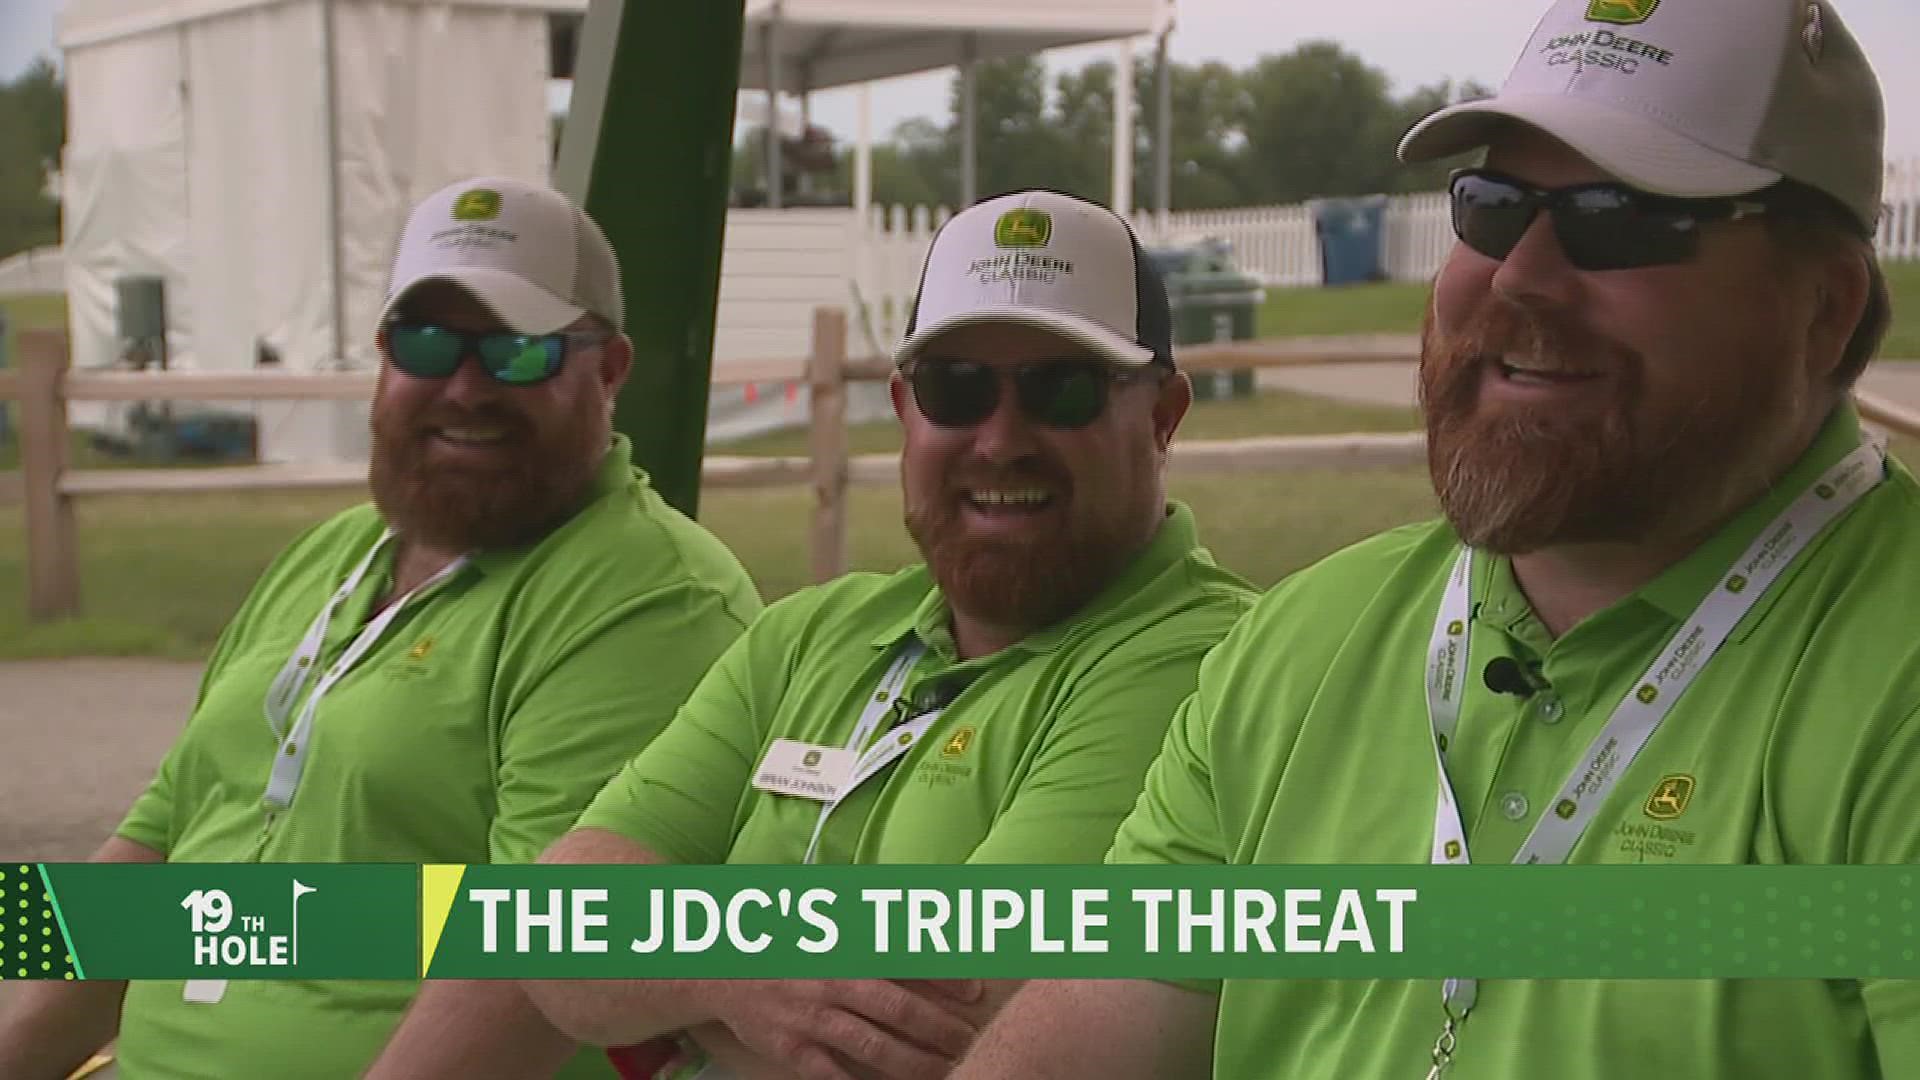 If you do a double (or triple take), you wouldn't be the first one! These identical twins have an unrelated third doppelganger and all three work at the JDC.